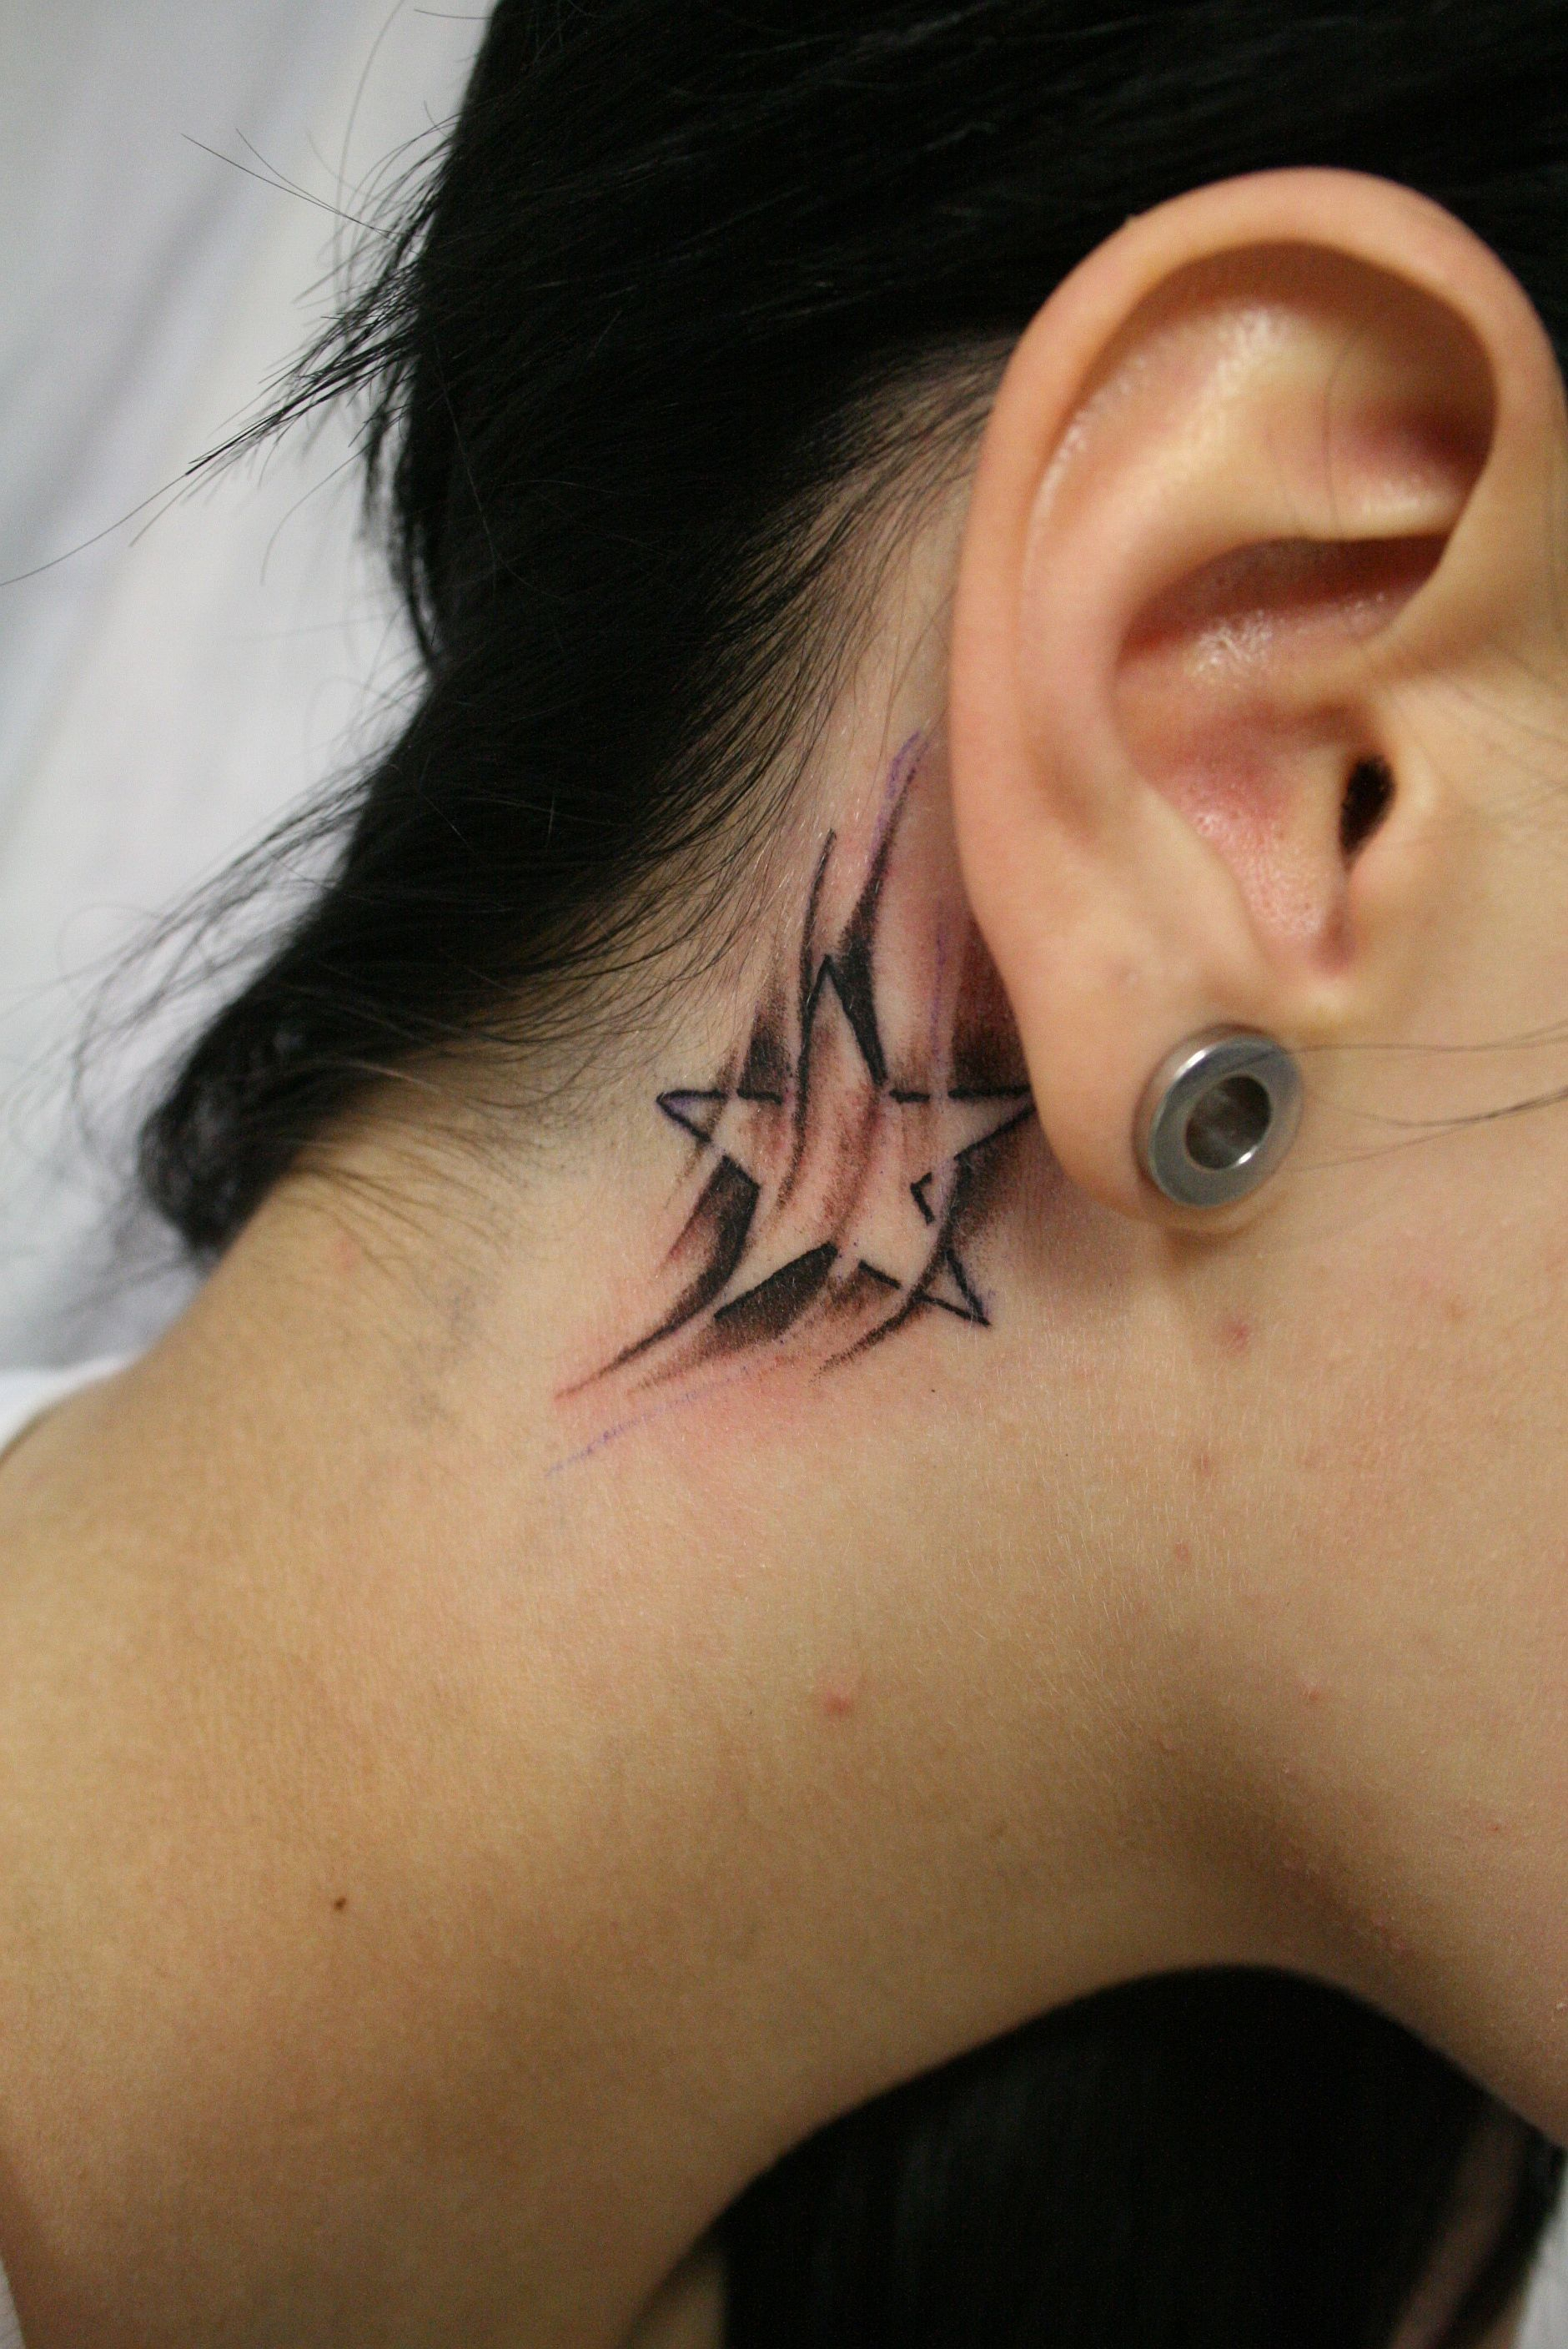 Astonishing Behind Ear Butterfly Tattoos Amazing Tattoo Design for dimensions 1880 X 2816